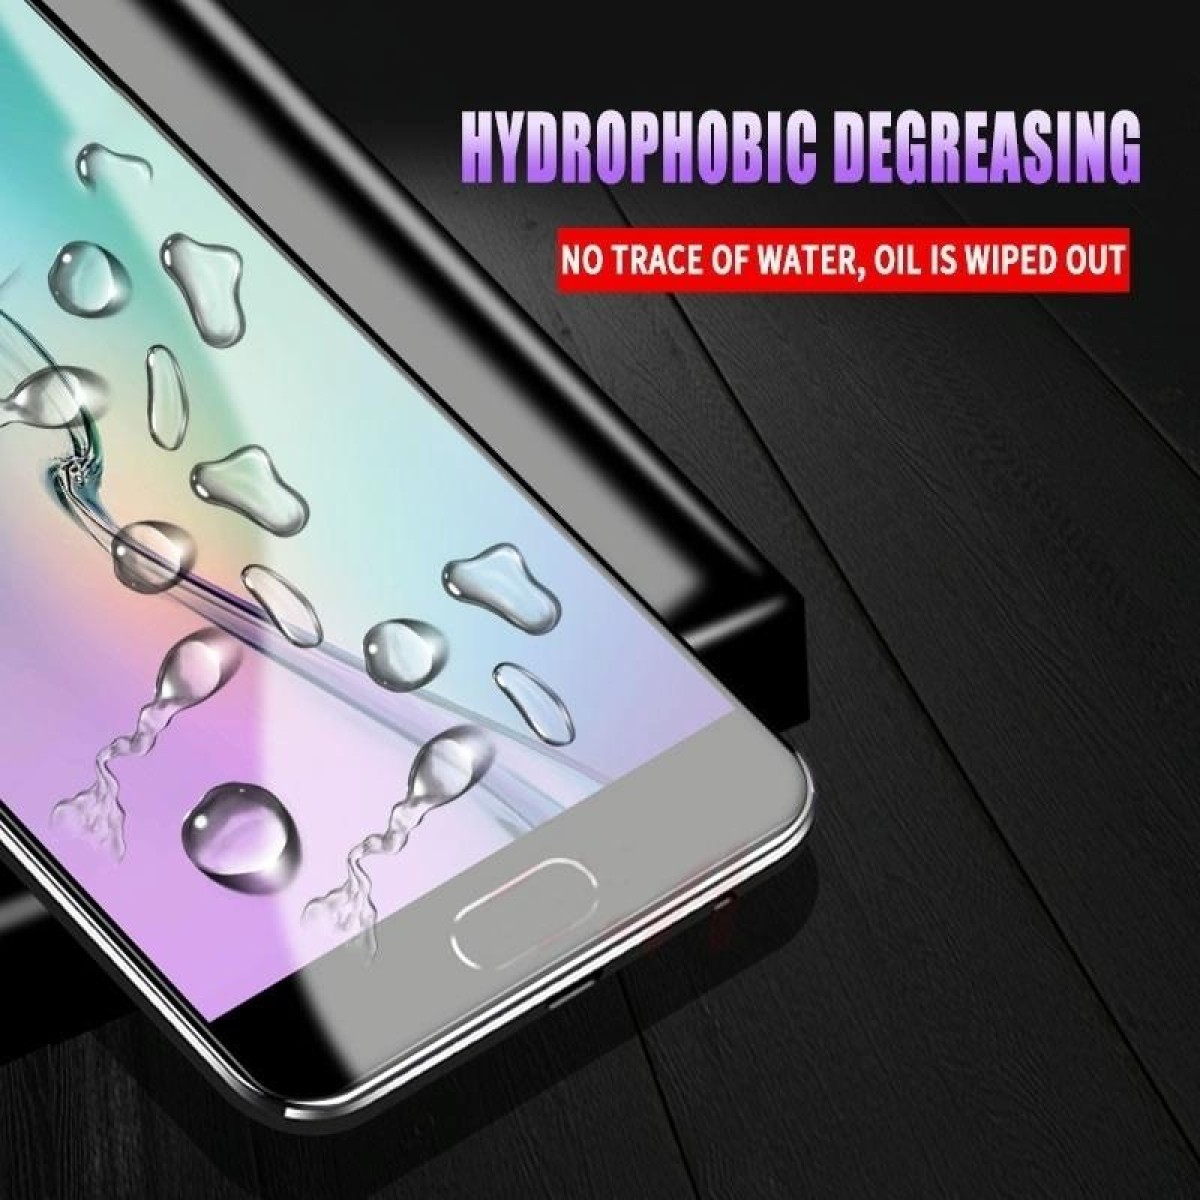 For OPPO Reno6 5G Full Screen Protector Explosion-proof Hydrogel Film